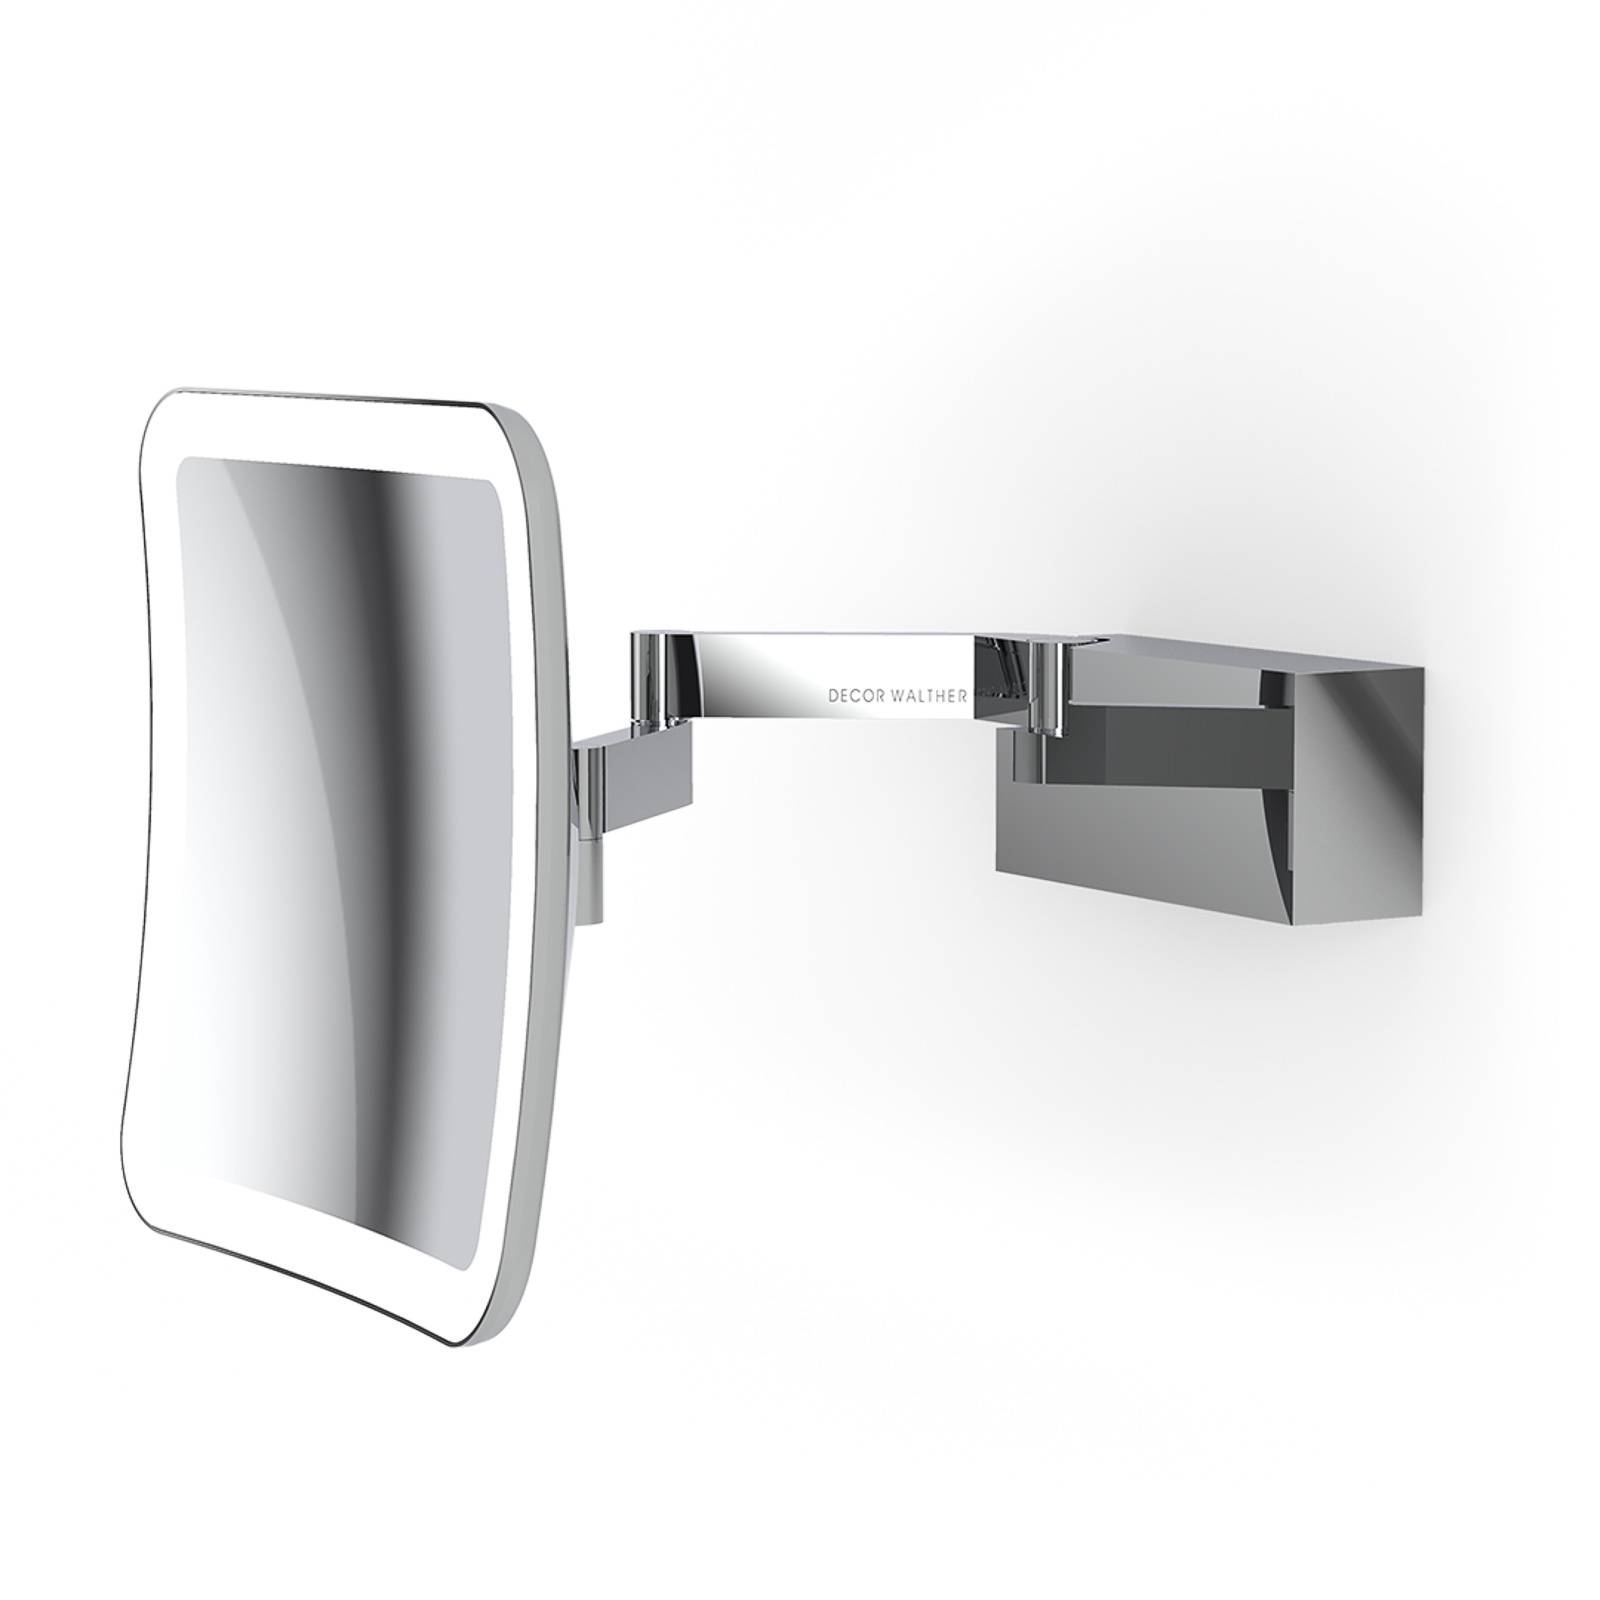 Decor Walther Vision S LED make-up mirror chrome